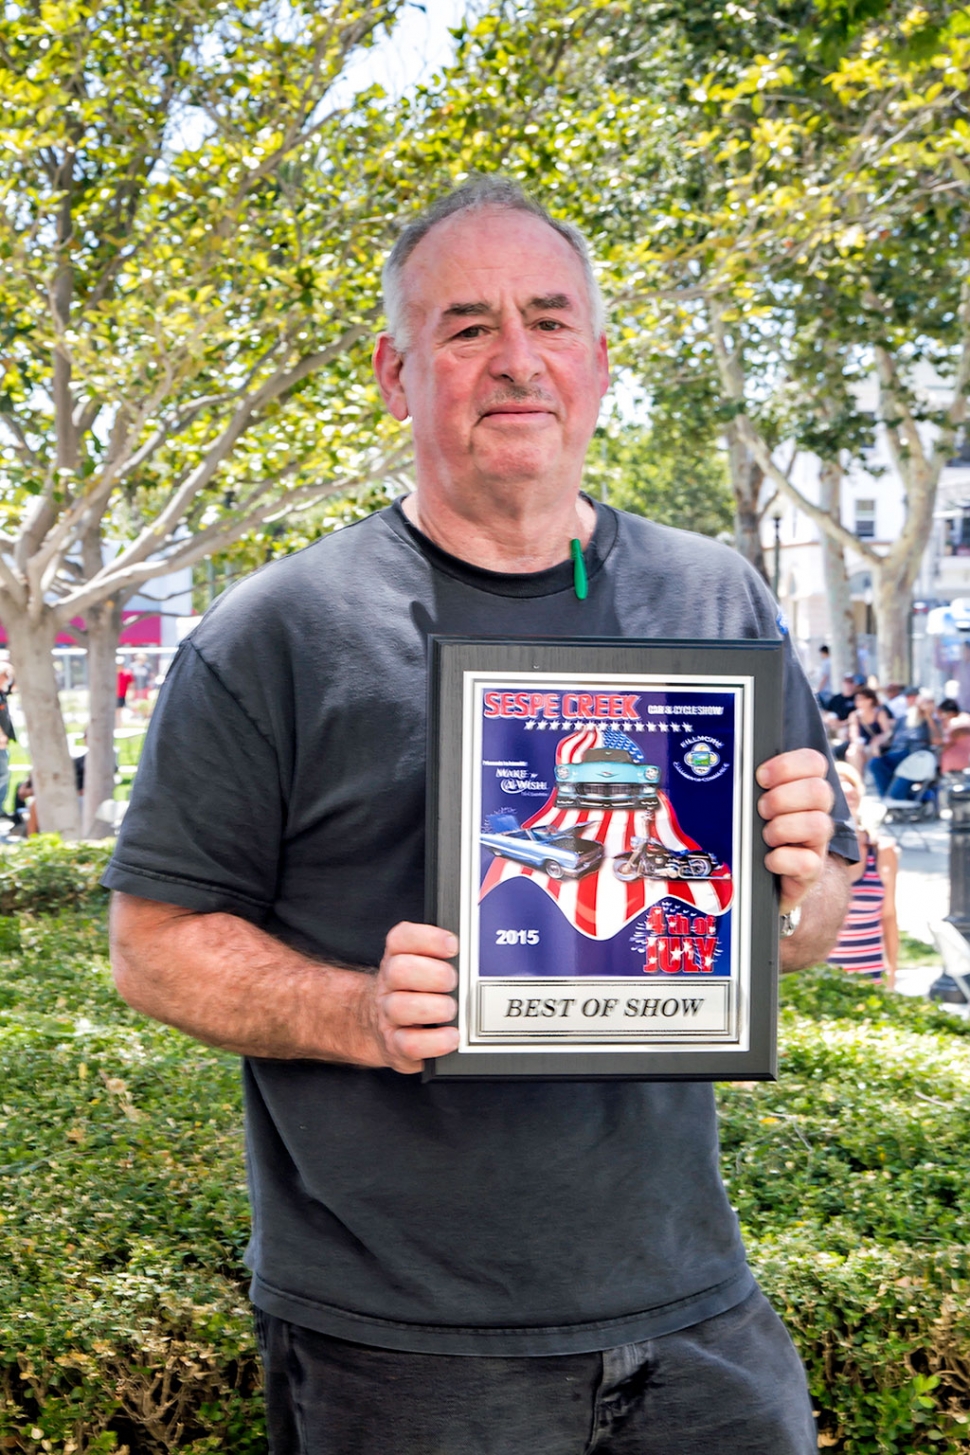 BEST OF SHOW Steve Sanett, Canoga Park, is pictured with his Best of Show plaque. His 1957 Ford E Series Thunderbird, above, took the coveted prize. The balmy weather didn’t keep classic car show seekers away. Central Avenue was crowded with onlookers, enjoying the variety of vintage and classic cars. Photos courtesy
Bob Crum.